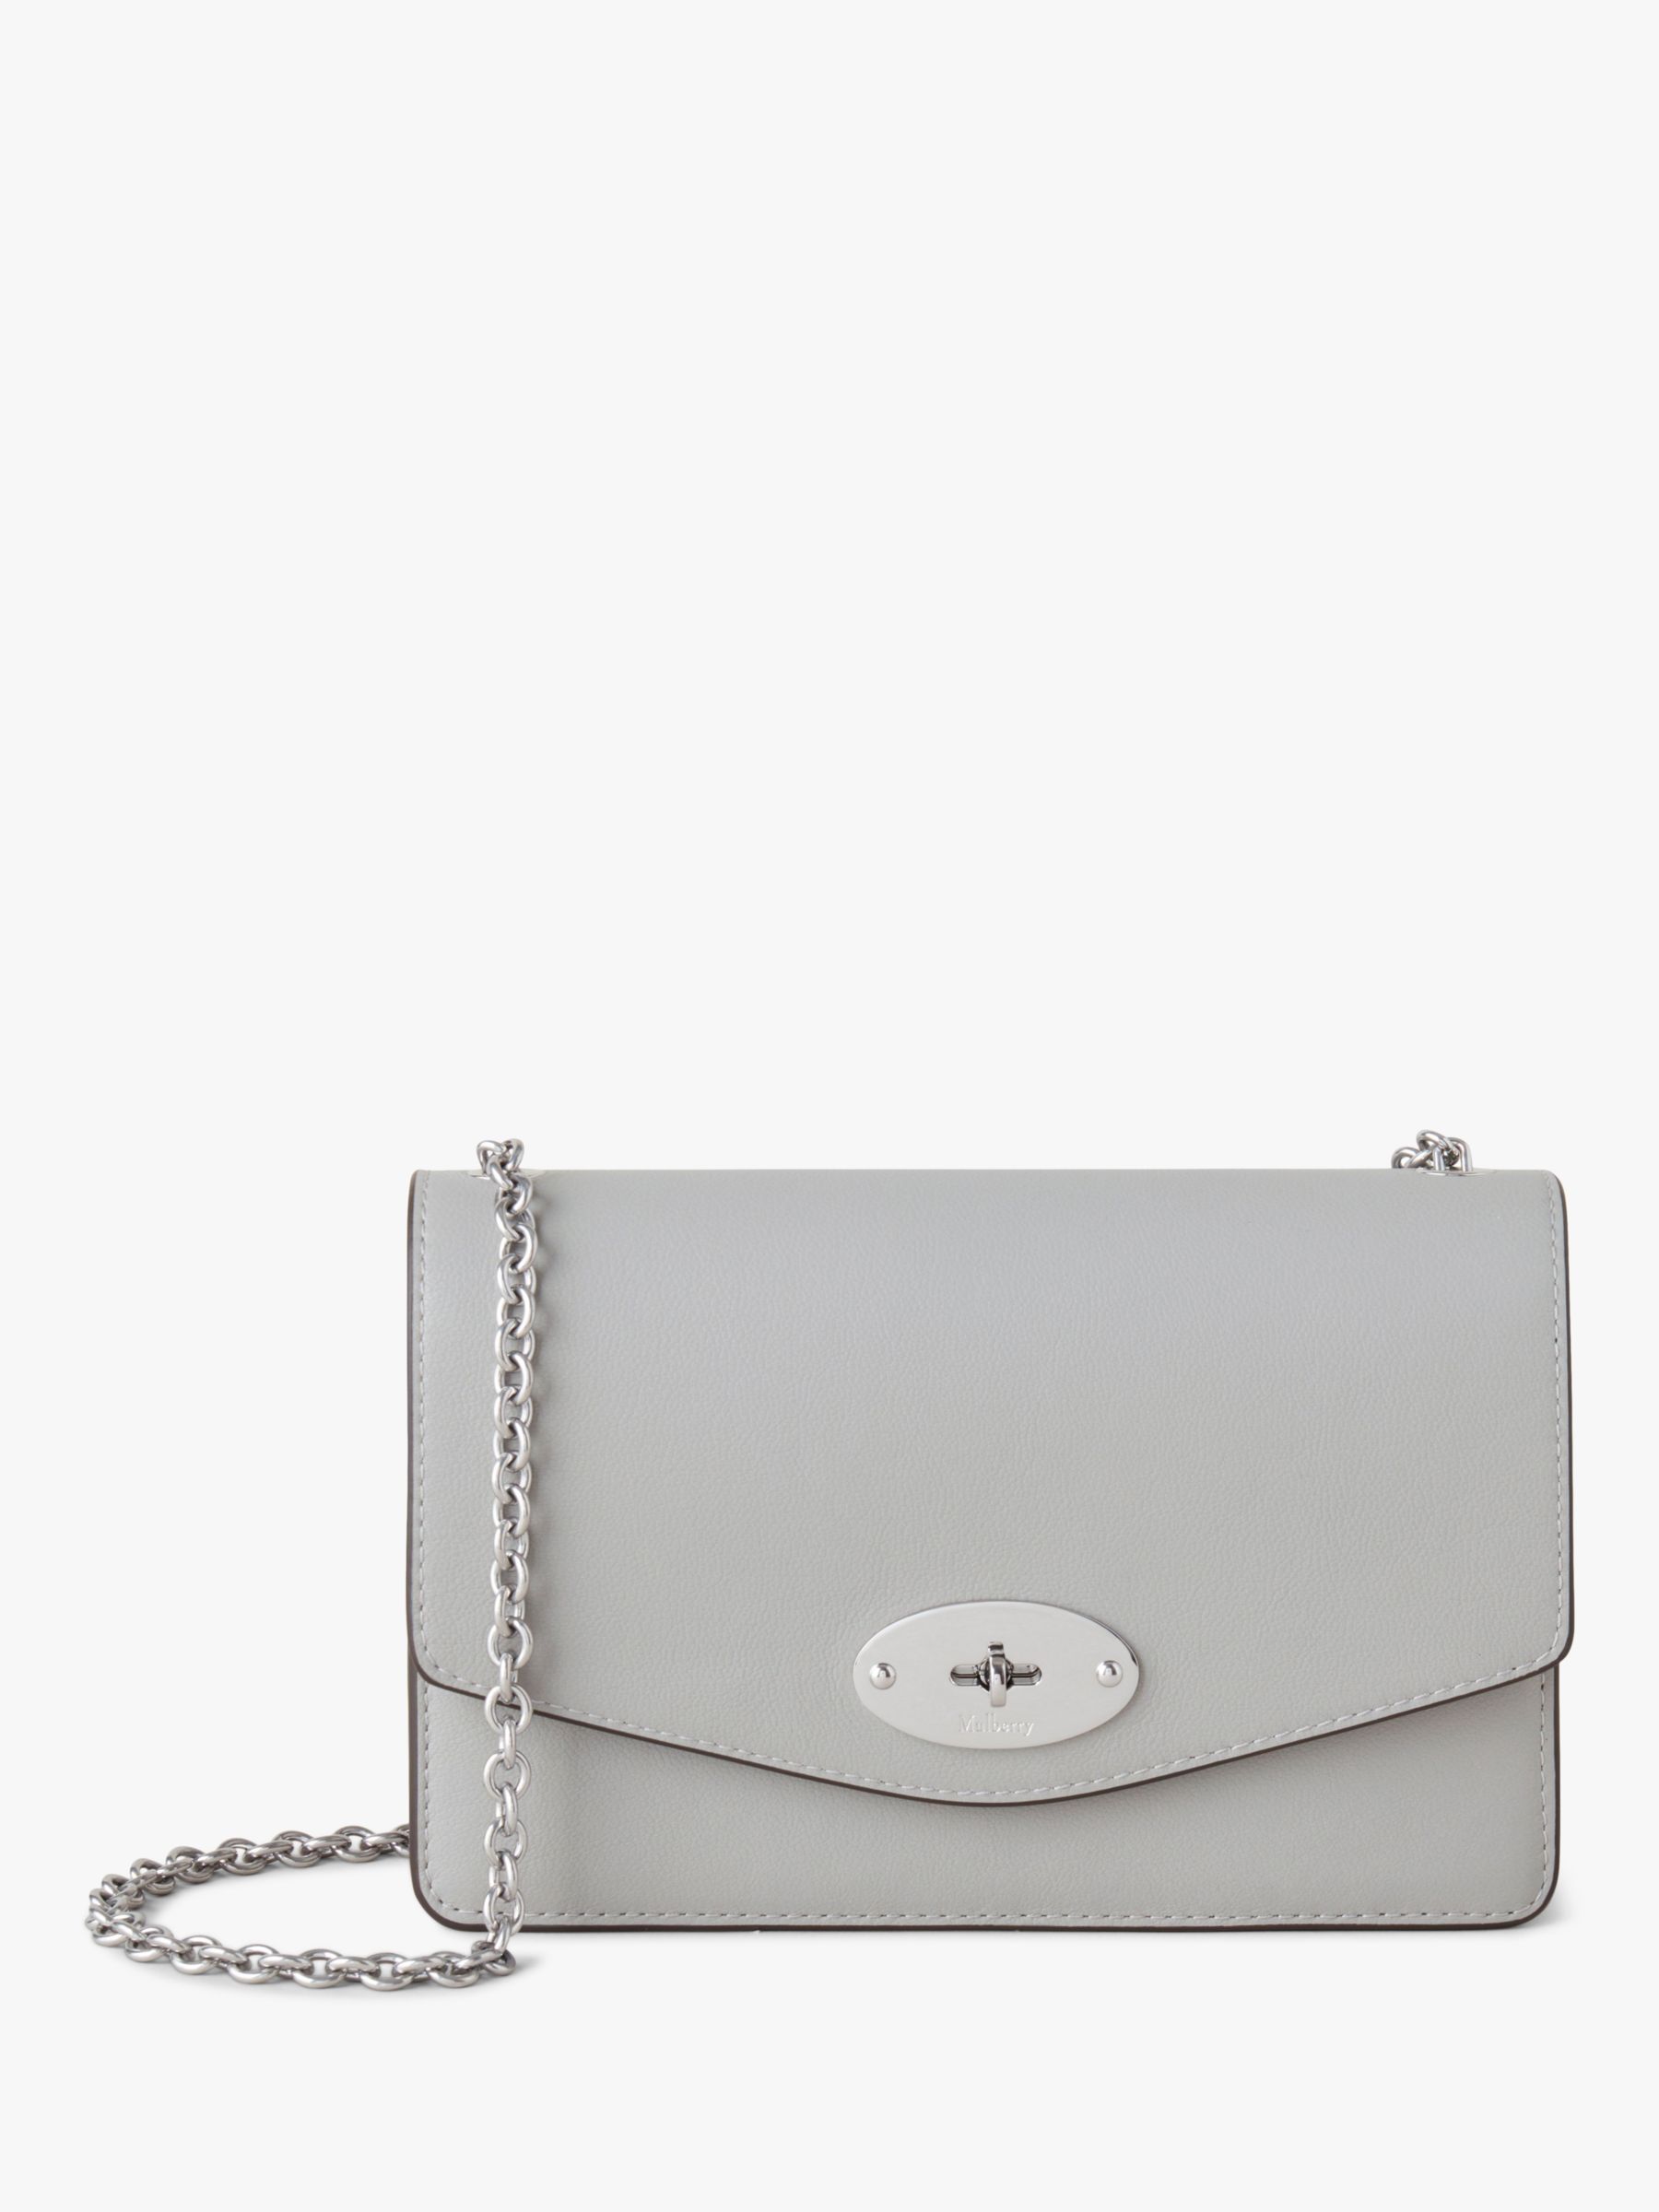 Mulberry Small Darley Small Classic Grain Leather Cross Body Bag, Pale ...